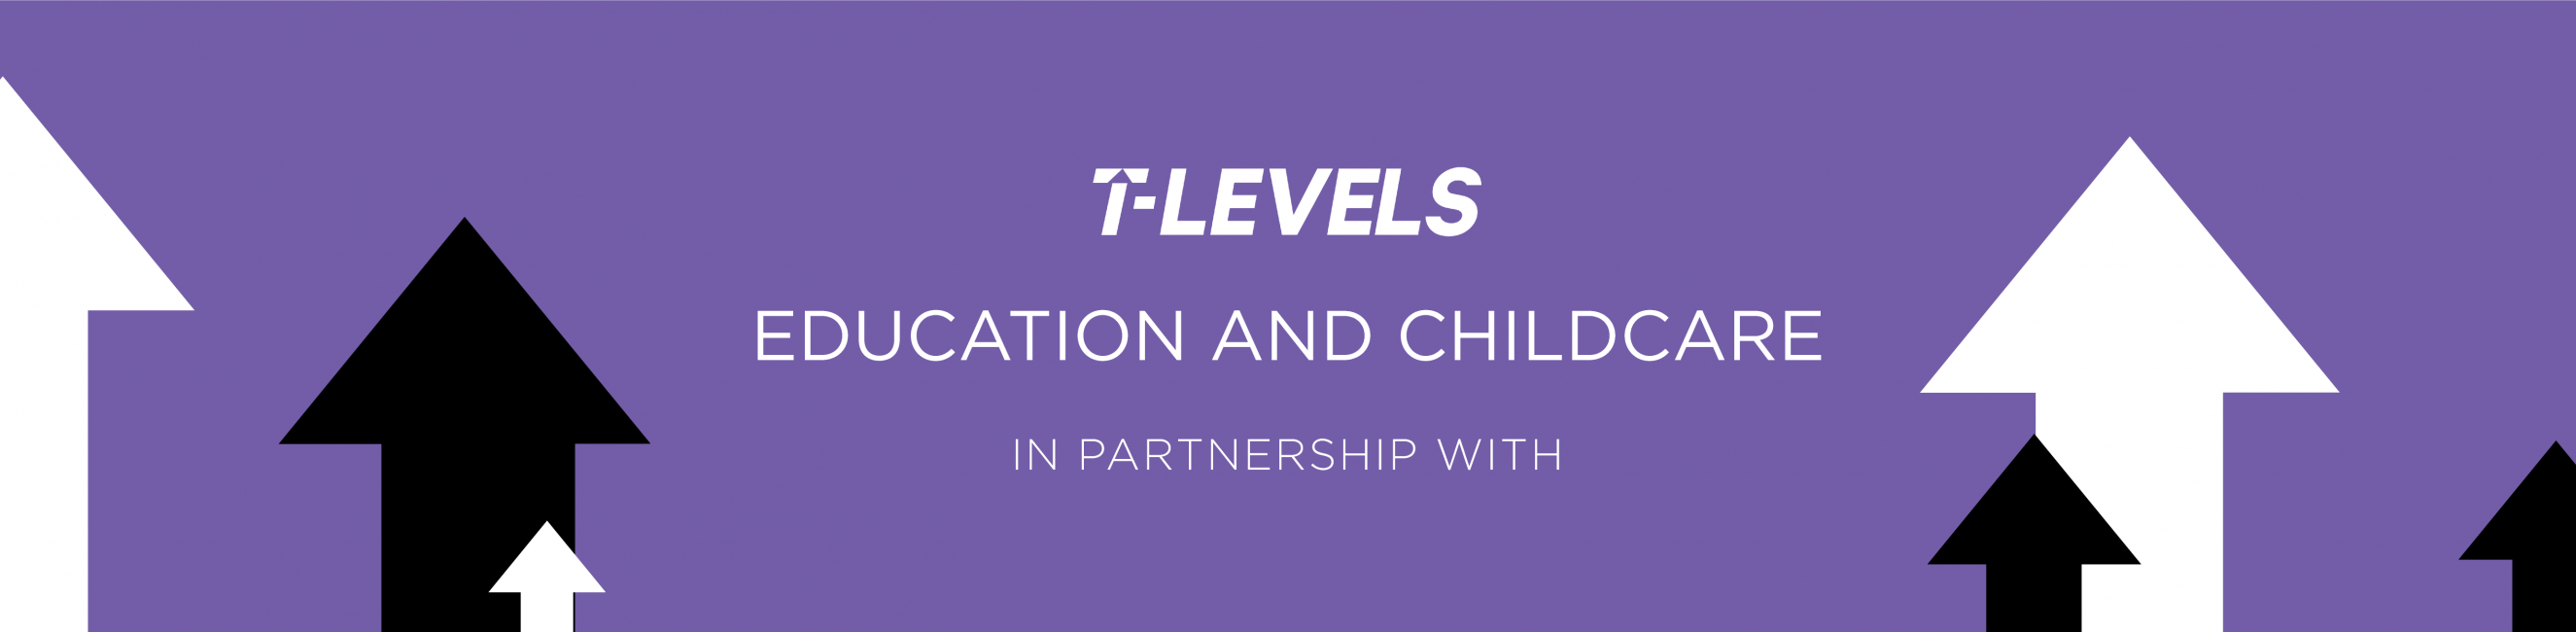 Early years, T-Levels partnerships